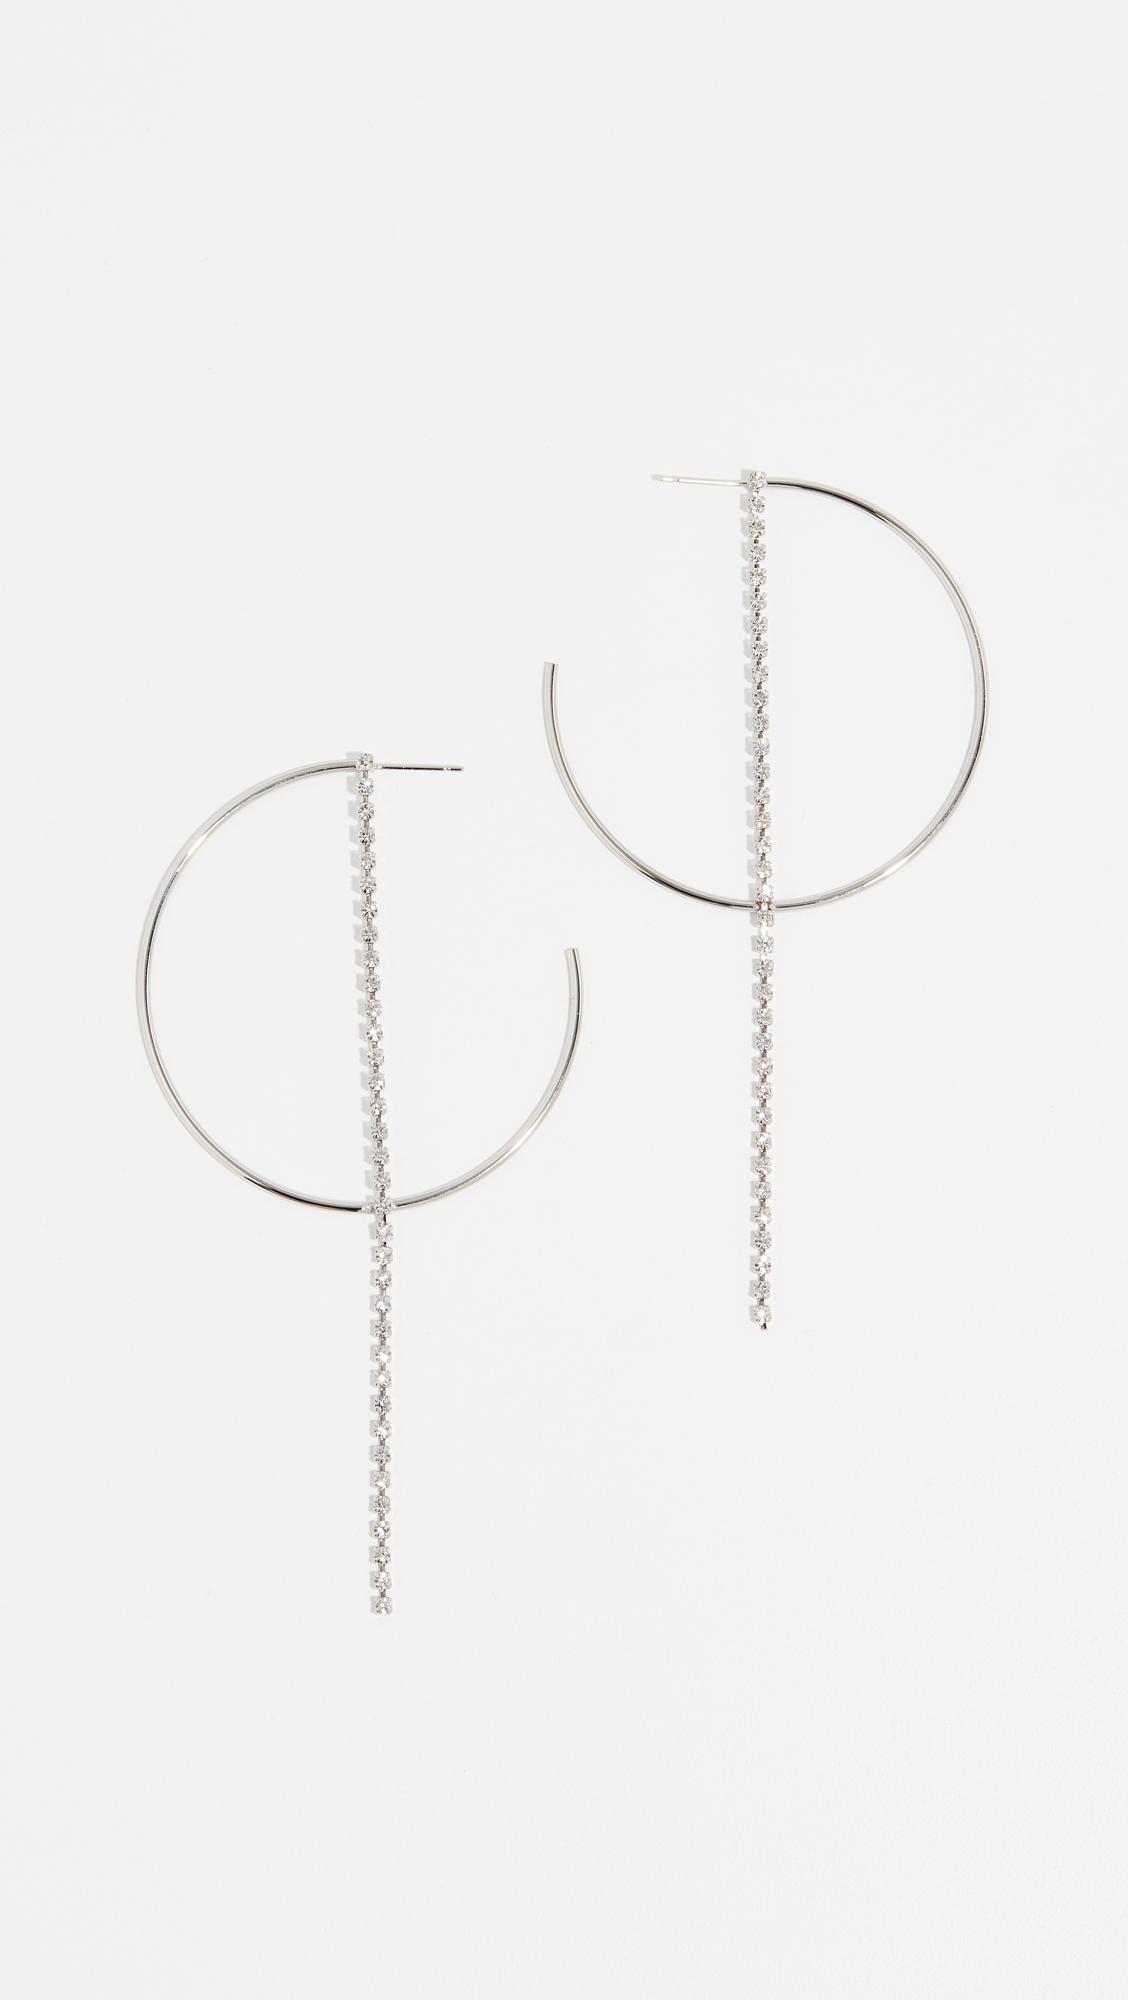 Justine Clenquet Milla Hoops in White | Lyst